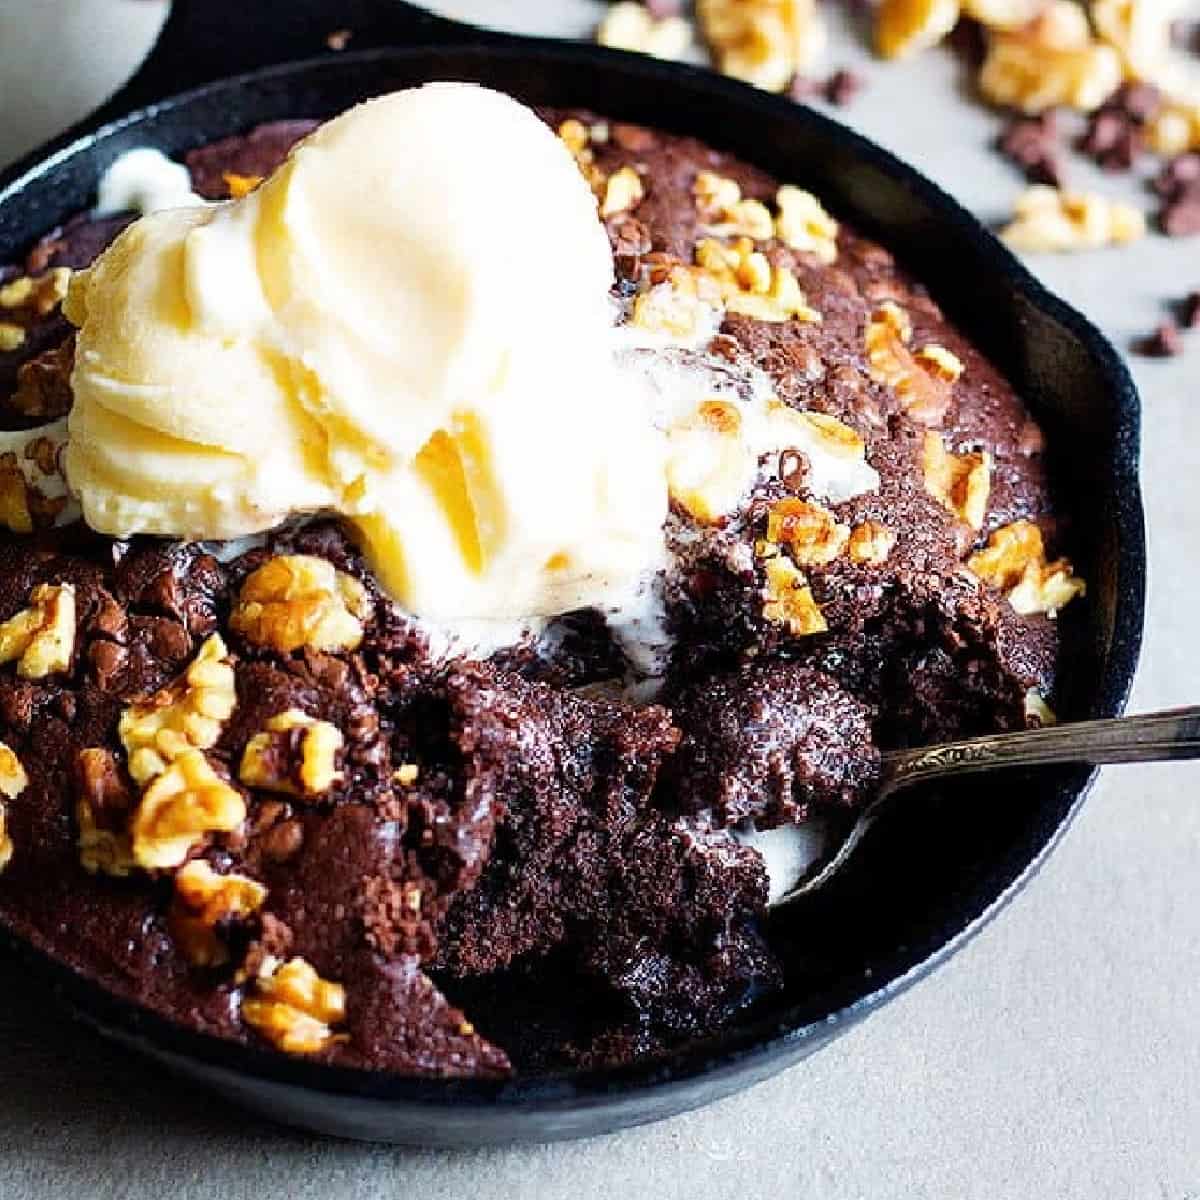 Nothing beats a good ooey gooey Double Chocolate Walnut Skillet Brownie with a large glass of milk. You'll need only a few ingredients to make this delicious skillet brownie!
